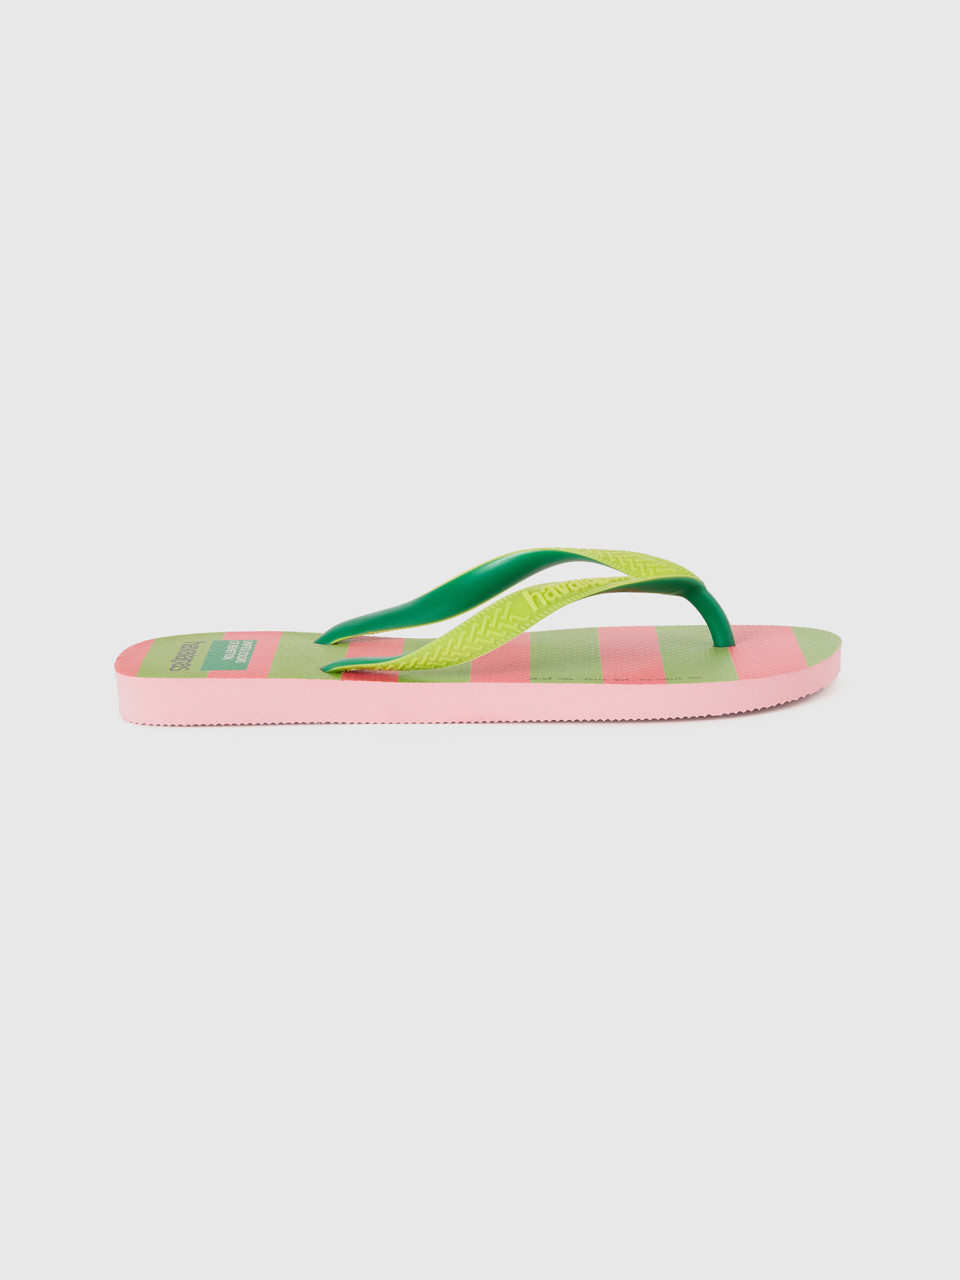 Benetton, Havaianas Flip Flops With Pink And Light Green Stripes,5-3,5